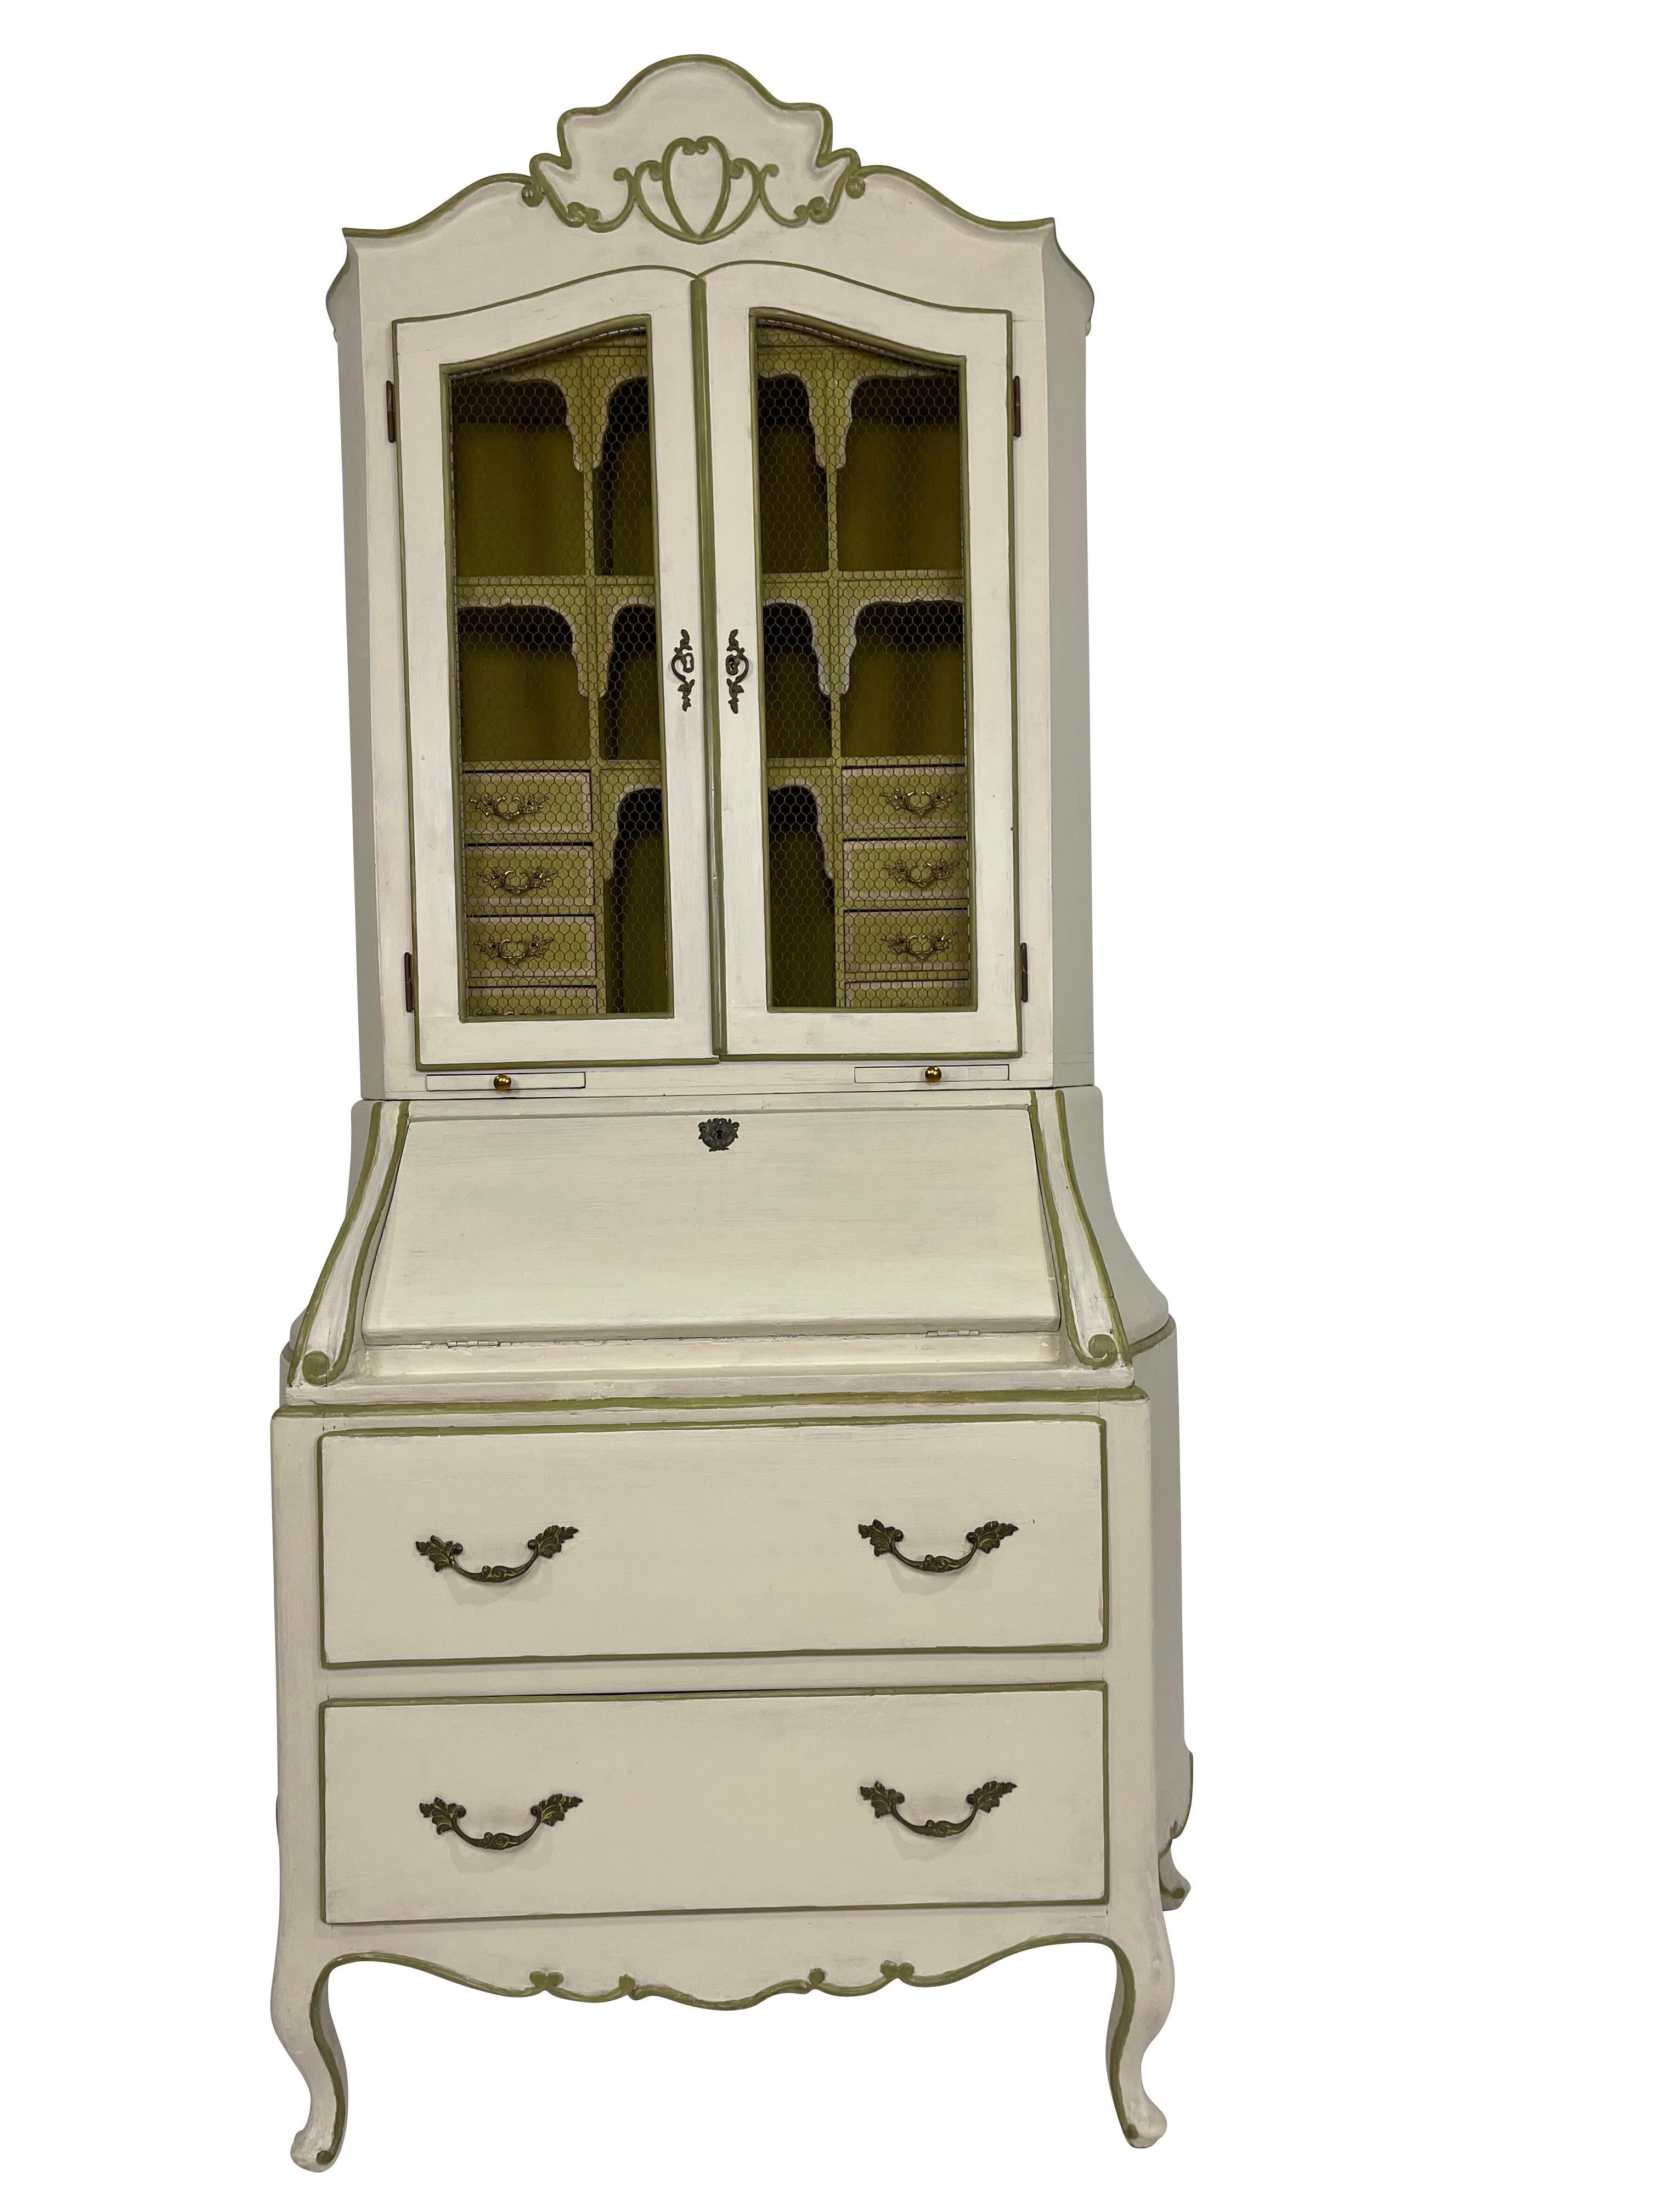 Painted French Provincial Ivory and Green circa 1920s Secretary/ Desk For Sale 4